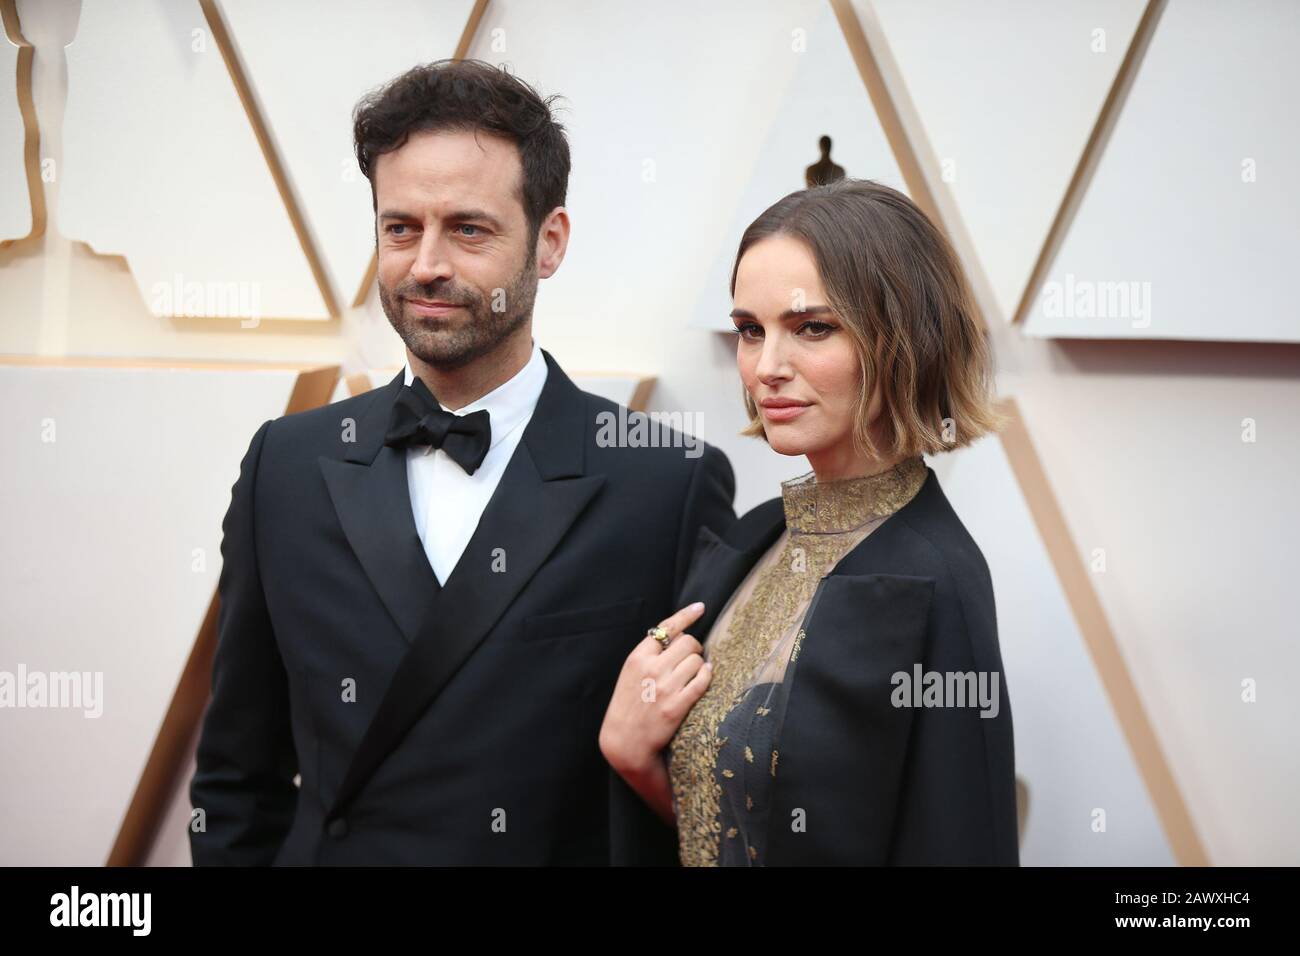 Los Angeles, USA. 9th Feb, 2020. Benjamin Millepied (L) and Natalie Portman arrive for the red carpet of the 92nd Academy Awards at the Dolby Theater in Los Angeles, the United States, on Feb. 9, 2020. Credit: Li Ying/Xinhua/Alamy Live News Stock Photo